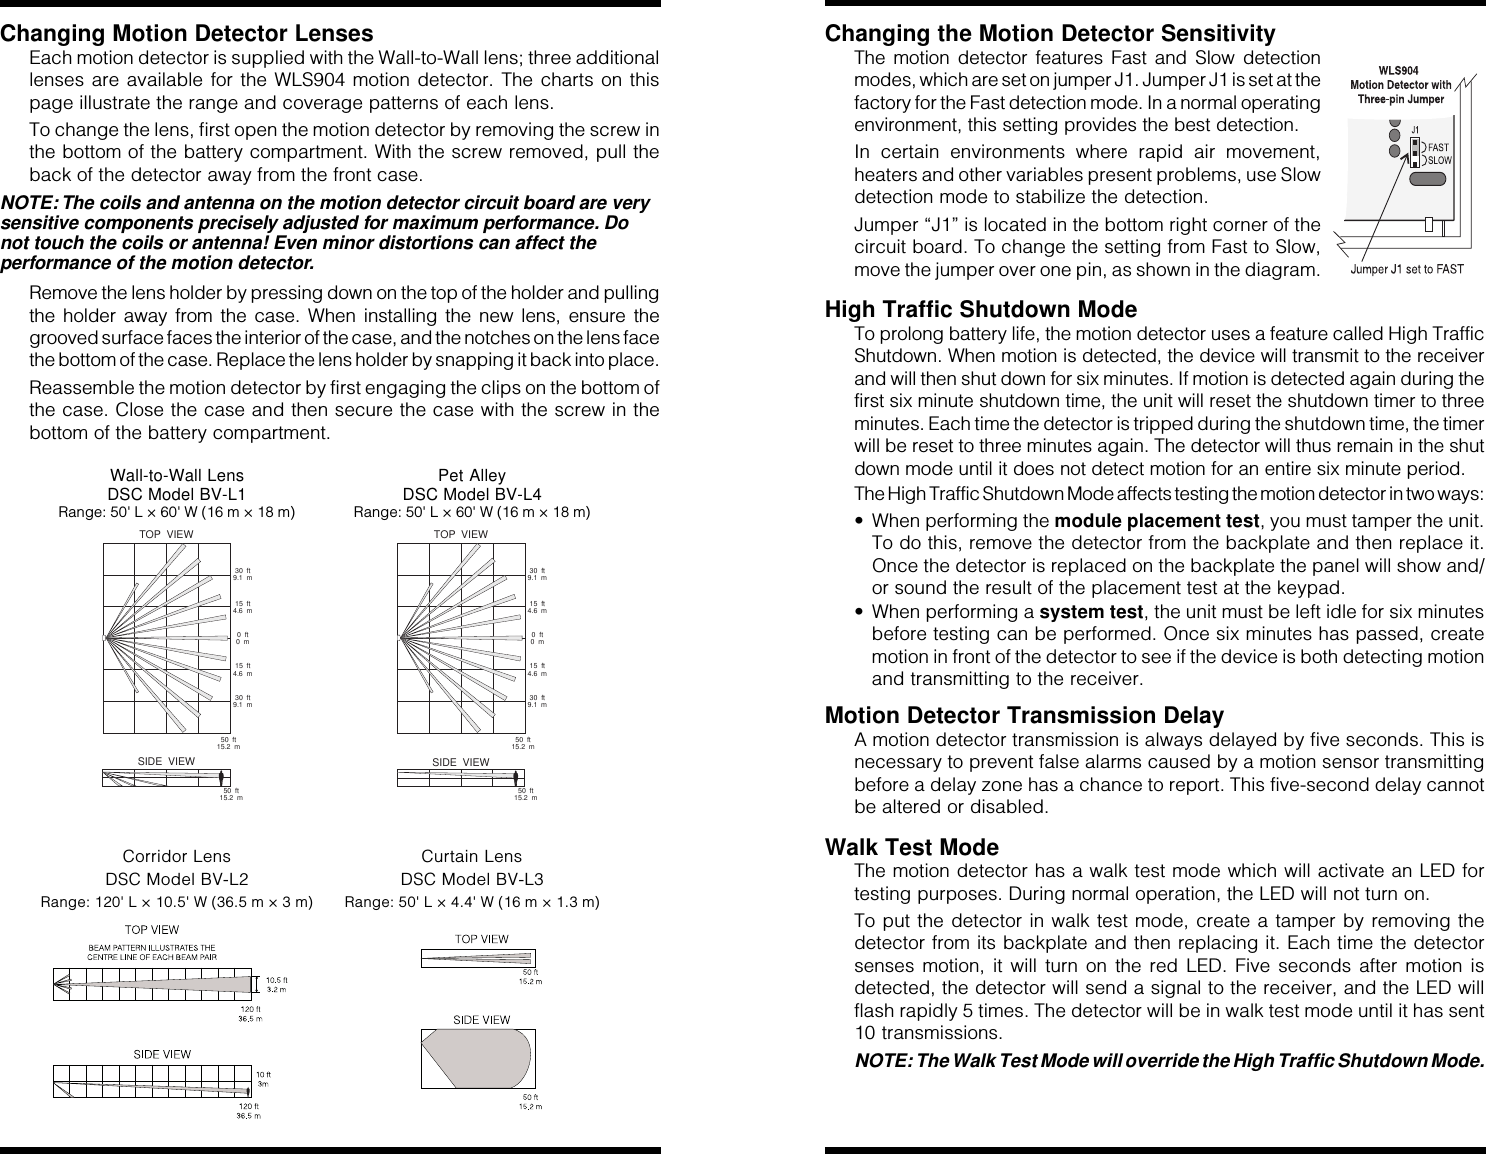 Changing Motion Detector LensesEach motion detector is supplied with the Wall-to-Wall lens; three additionallenses are available for the WLS904 motion detector. The charts on thispage illustrate the range and coverage patterns of each lens.To change the lens, first open the motion detector by removing the screw inthe bottom of the battery compartment. With the screw removed, pull theback of the detector away from the front case.NOTE: The coils and antenna on the motion detector circuit board are verysensitive components precisely adjusted for maximum performance. Donot touch the coils or antenna! Even minor distortions can affect theperformance of the motion detector.Remove the lens holder by pressing down on the top of the holder and pullingthe holder away from the case. When installing the new lens, ensure thegrooved surface faces the interior of the case, and the notches on the lens facethe bottom of the case. Replace the lens holder by snapping it back into place.Reassemble the motion detector by first engaging the clips on the bottom ofthe case. Close the case and then secure the case with the screw in thebottom of the battery compartment.Wall-to-Wall Lens Pet AlleyDSC Model BV-L1 DSC Model BV-L4Range: 50&apos; L × 60&apos; W (16 m × 18 m) Range: 50&apos; L × 60&apos; W (16 m × 18 m)50 ft15.2 m0ft0m15 ft4.6 m15 ft4.6 m30 ft9.1 m30 ft9.1 m50 ft15.2 mTOP VIEWSIDE VIEW50 ft15.2 m0ft0m15 ft4.6 m15 ft4.6 m30 ft9.1 m30 ft9.1 m50 ft15.2 mTOP VIEWSIDE VIEWCorridor Lens Curtain LensDSC Model BV-L2 DSC Model BV-L3Range: 120&apos; L × 10.5&apos; W (36.5 m × 3 m) Range: 50&apos; L × 4.4&apos; W (16 m × 1.3 m)Changing the Motion Detector SensitivityThe motion detector features Fast and Slow detectionmodes, which are set on jumper J1. Jumper J1 is set at thefactory for the Fast detection mode. In a normal operatingenvironment, this setting provides the best detection.In certain environments where rapid air movement,heaters and other variables present problems, use Slowdetection mode to stabilize the detection.Jumper “J1” is located in the bottom right corner of thecircuit board. To change the setting from Fast to Slow,move the jumper over one pin, as shown in the diagram.High Traffic Shutdown ModeTo prolong battery life, the motion detector uses a feature called High TrafficShutdown. When motion is detected, the device will transmit to the receiverand will then shut down for six minutes. If motion is detected again during thefirst six minute shutdown time, the unit will reset the shutdown timer to threeminutes. Each time the detector is tripped during the shutdown time, the timerwill be reset to three minutes again. The detector will thus remain in the shutdown mode until it does not detect motion for an entire six minute period.The High Traffic Shutdown Mode affects testing the motion detector in two ways:• When performing the module placement test, you must tamper the unit.To do this, remove the detector from the backplate and then replace it.Once the detector is replaced on the backplate the panel will show and/or sound the result of the placement test at the keypad.• When performing a system test, the unit must be left idle for six minutesbefore testing can be performed. Once six minutes has passed, createmotion in front of the detector to see if the device is both detecting motionand transmitting to the receiver.Motion Detector Transmission DelayA motion detector transmission is always delayed by five seconds. This isnecessary to prevent false alarms caused by a motion sensor transmittingbefore a delay zone has a chance to report. This five-second delay cannotbe altered or disabled.Walk Test ModeThe motion detector has a walk test mode which will activate an LED fortesting purposes. During normal operation, the LED will not turn on.To put the detector in walk test mode, create a tamper by removing thedetector from its backplate and then replacing it. Each time the detectorsenses motion, it will turn on the red LED. Five seconds after motion isdetected, the detector will send a signal to the receiver, and the LED willflash rapidly 5 times. The detector will be in walk test mode until it has sent10 transmissions.NOTE: The Walk Test Mode will override the High Traffic Shutdown Mode.